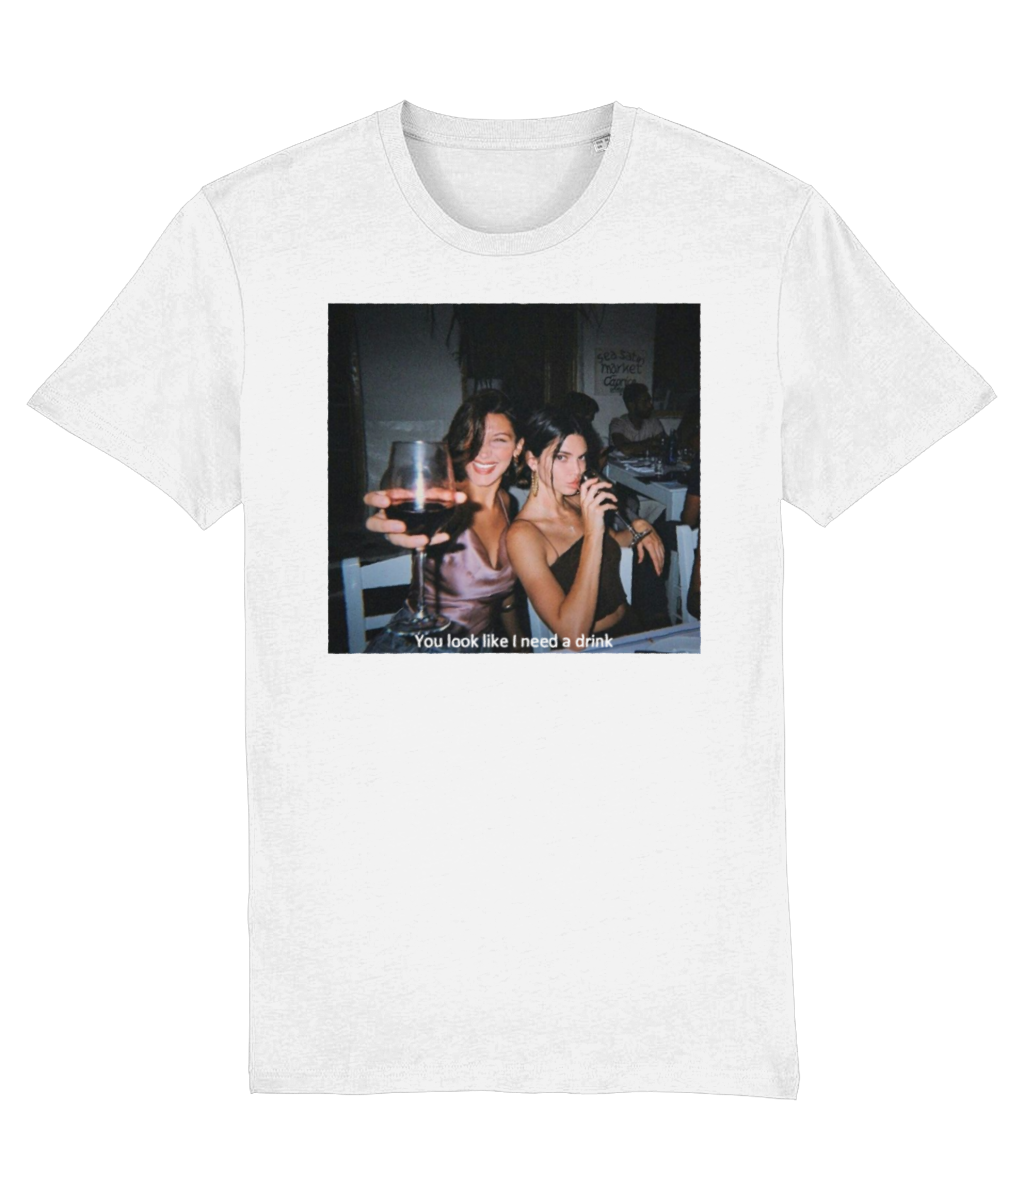 NEED A DRINK SHIRT